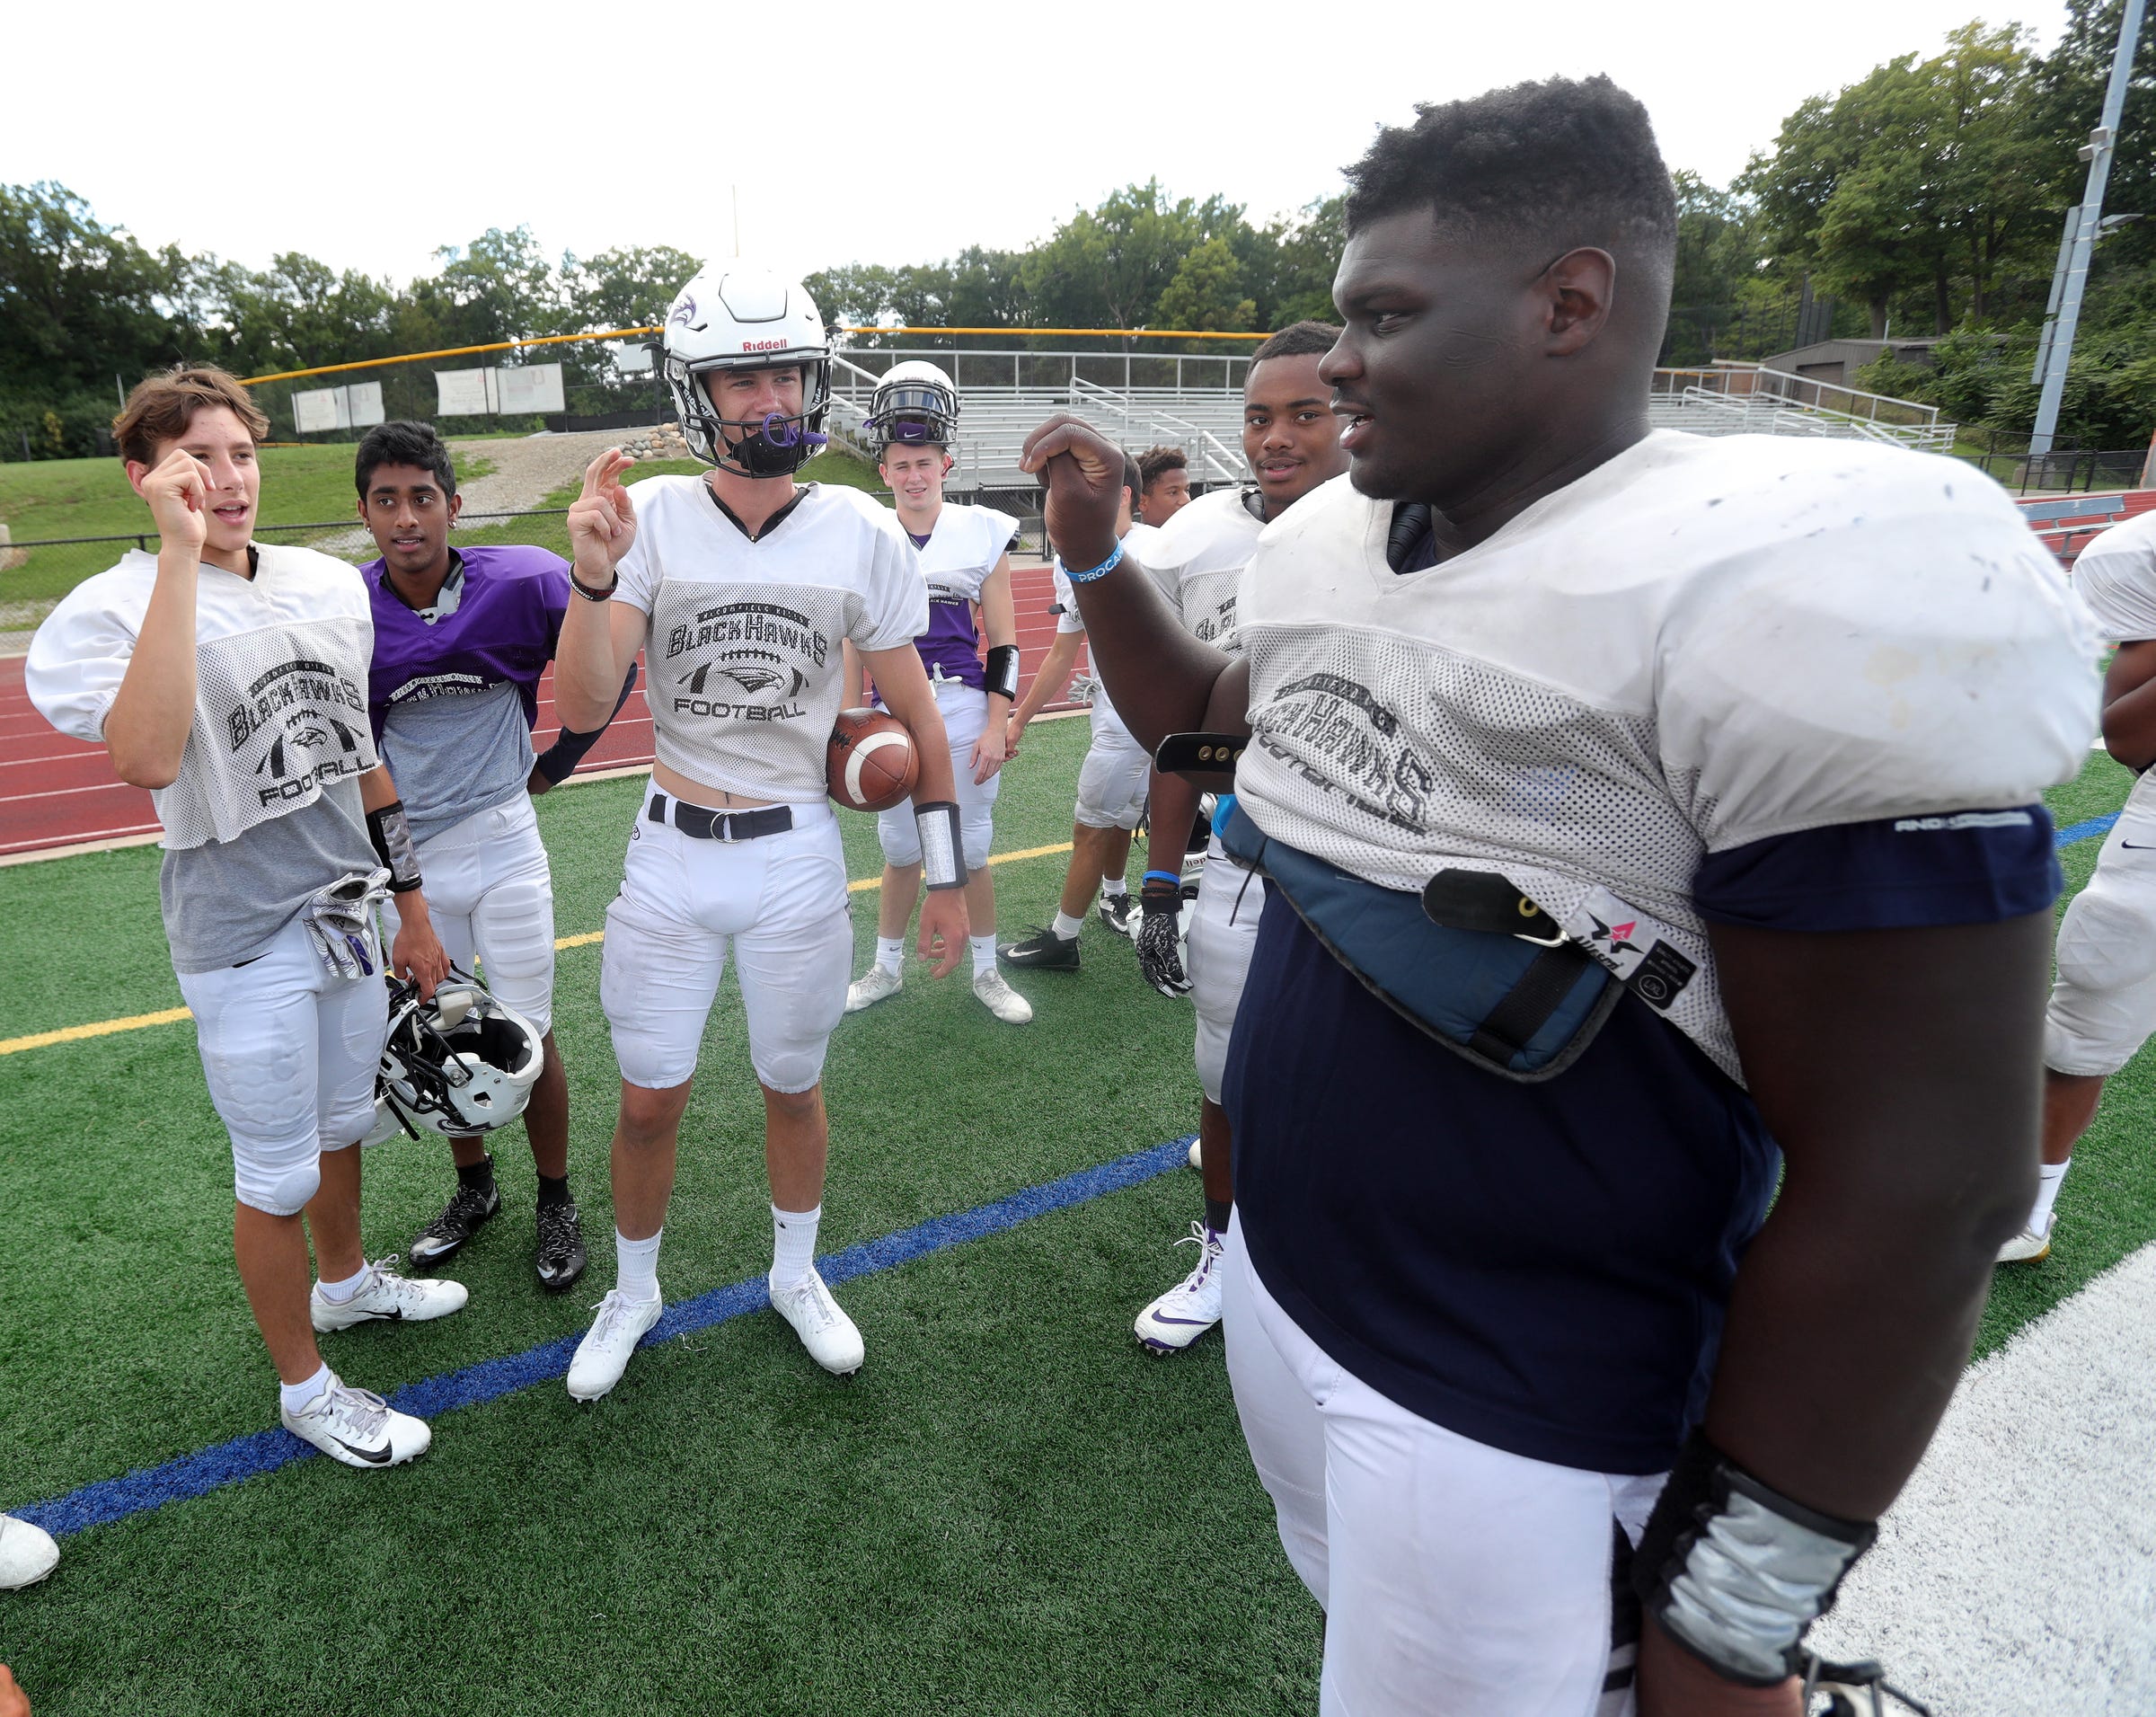 PHOTO: Bloomfield Hills' Dean Bolton, Santhosh Ramachandran and Tasnner Slazinski sign with Bloomfield Hills defensive lineman Devin Holmes, right, who is deaf, during practice on Wednesday, Sept. 4, 2019, at Bloomfield Hills High School.